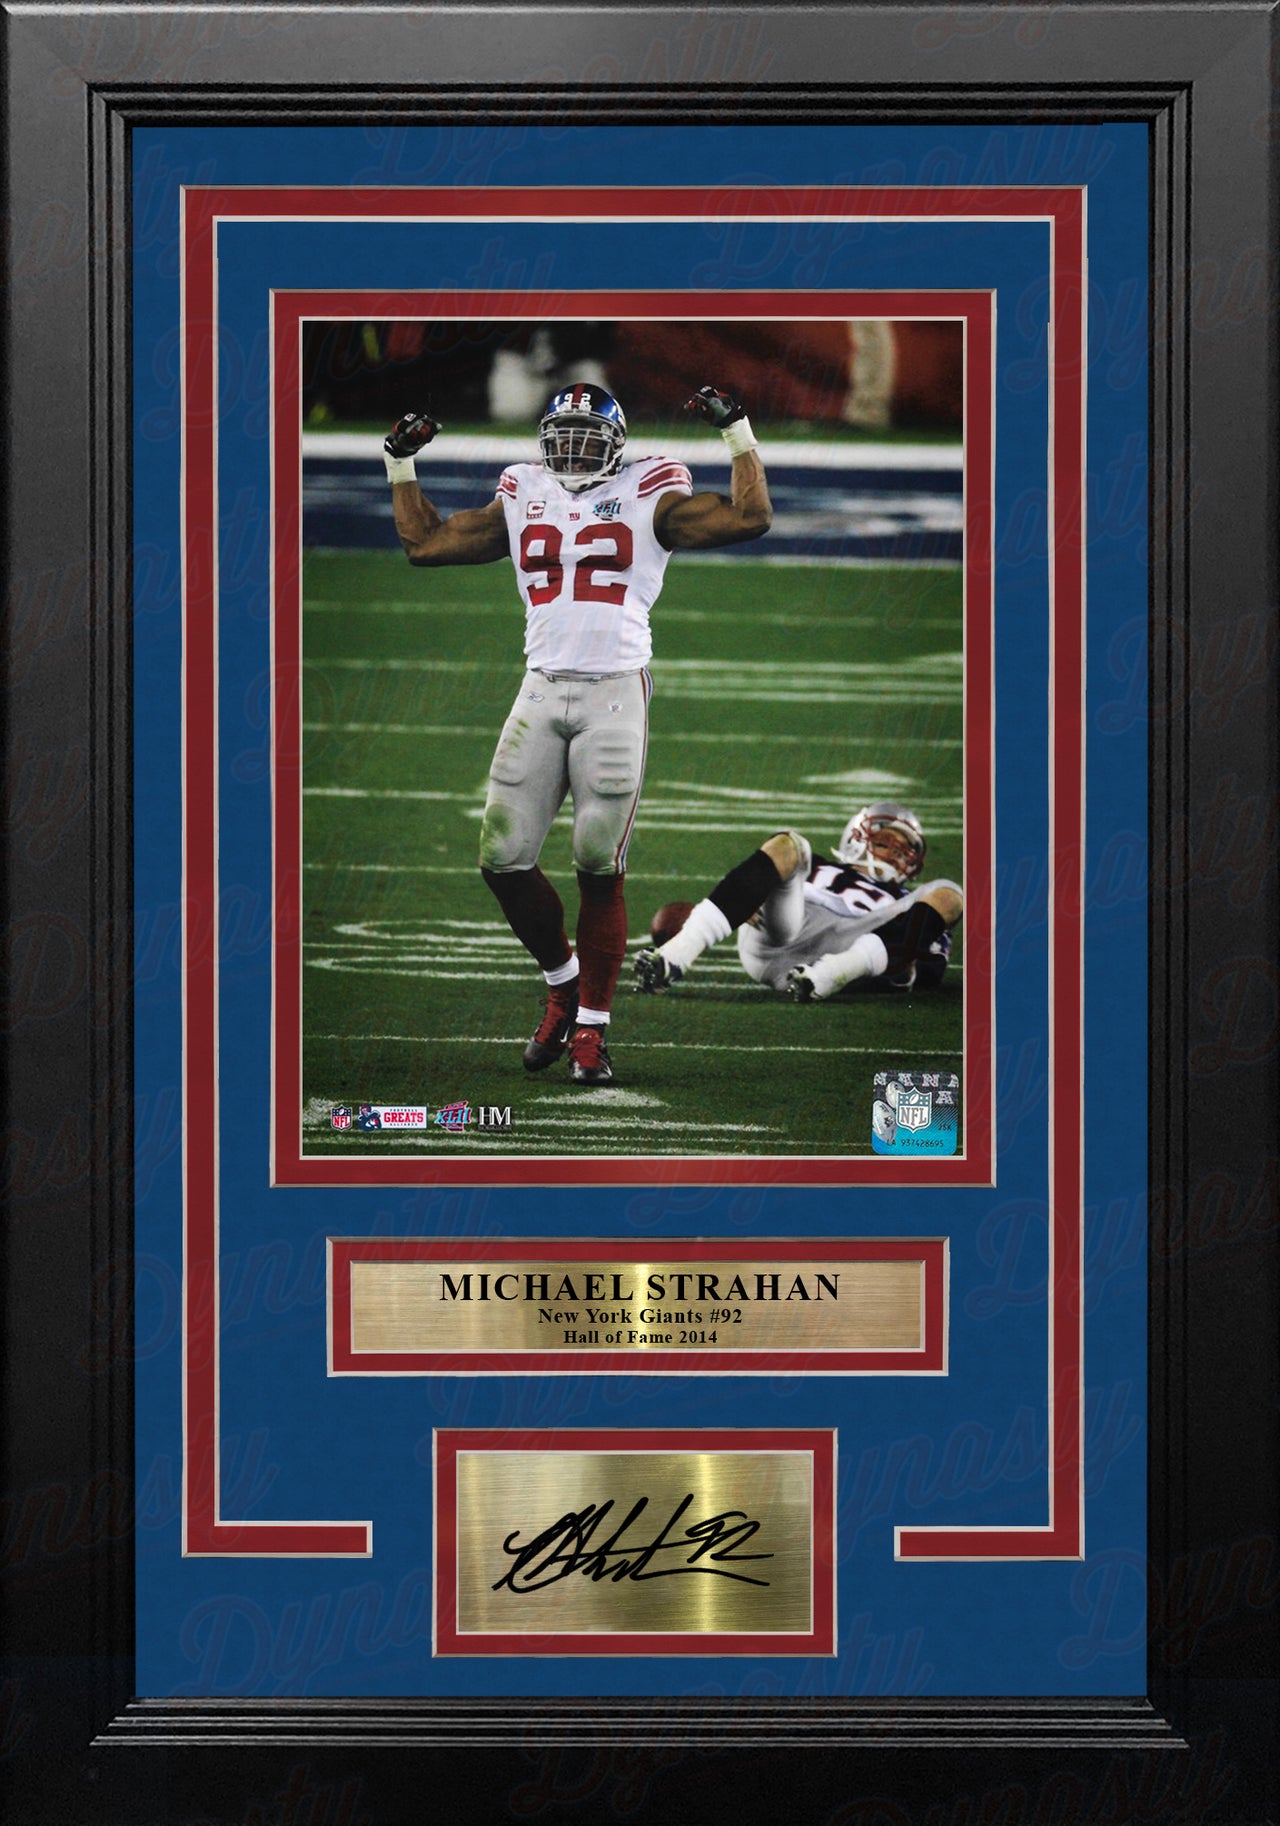 Michael Strahan Over Brady Super Bowl XLII NY Giants 8x10 Framed Photo with Engraved Autograph